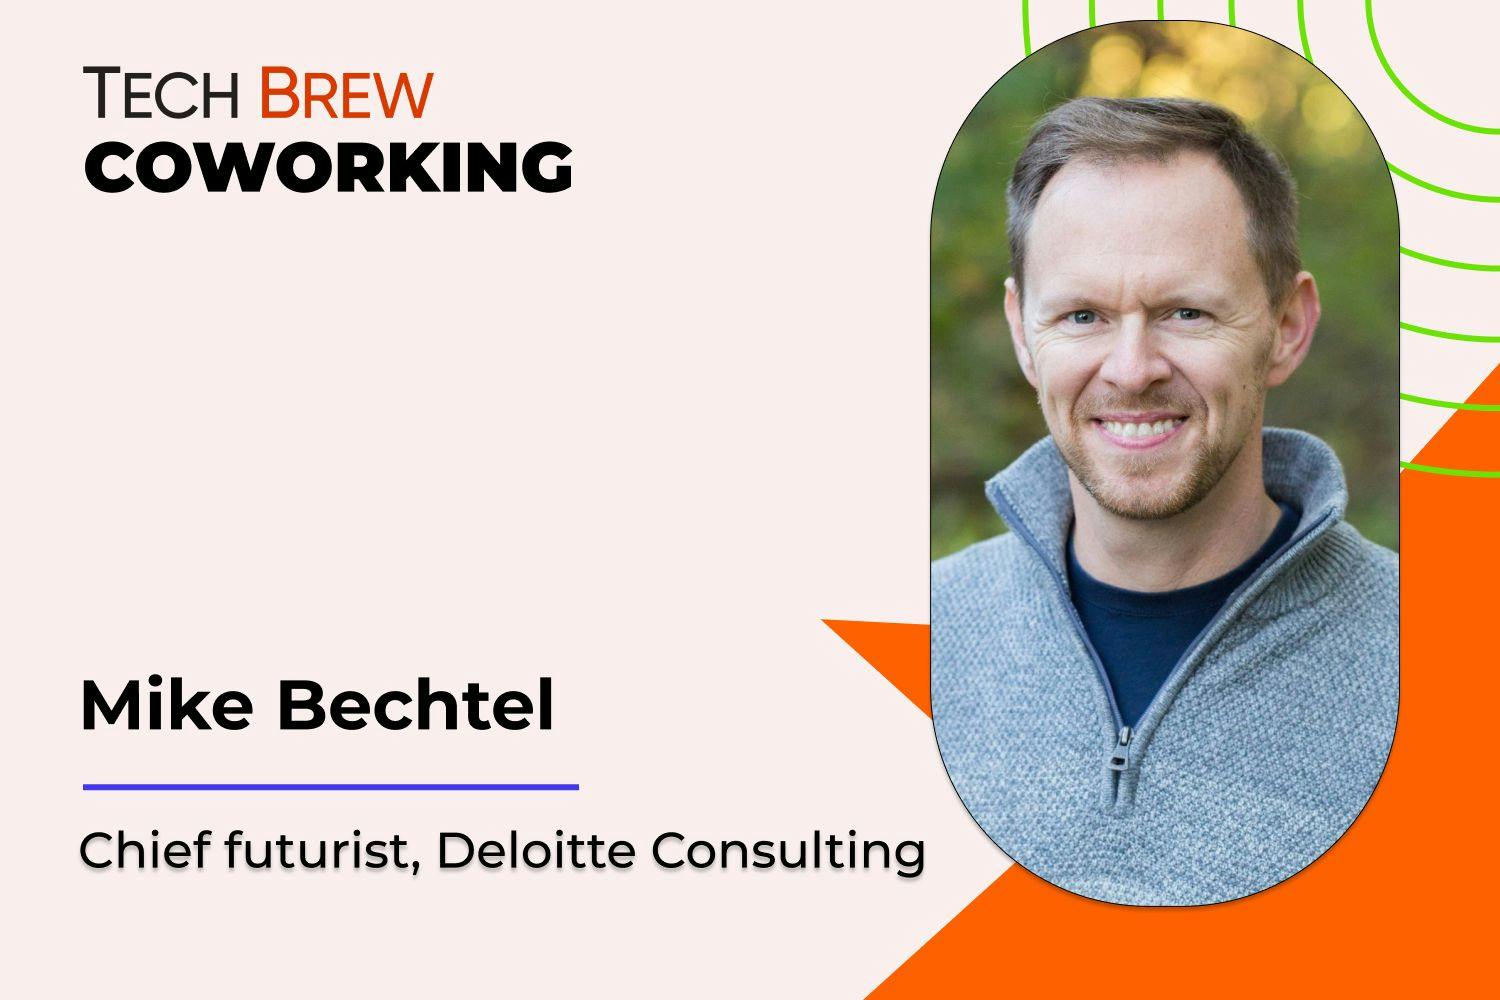 Graphic featuring a headshot of Mike Bechtel, chief futurist at Deloitte Consulting